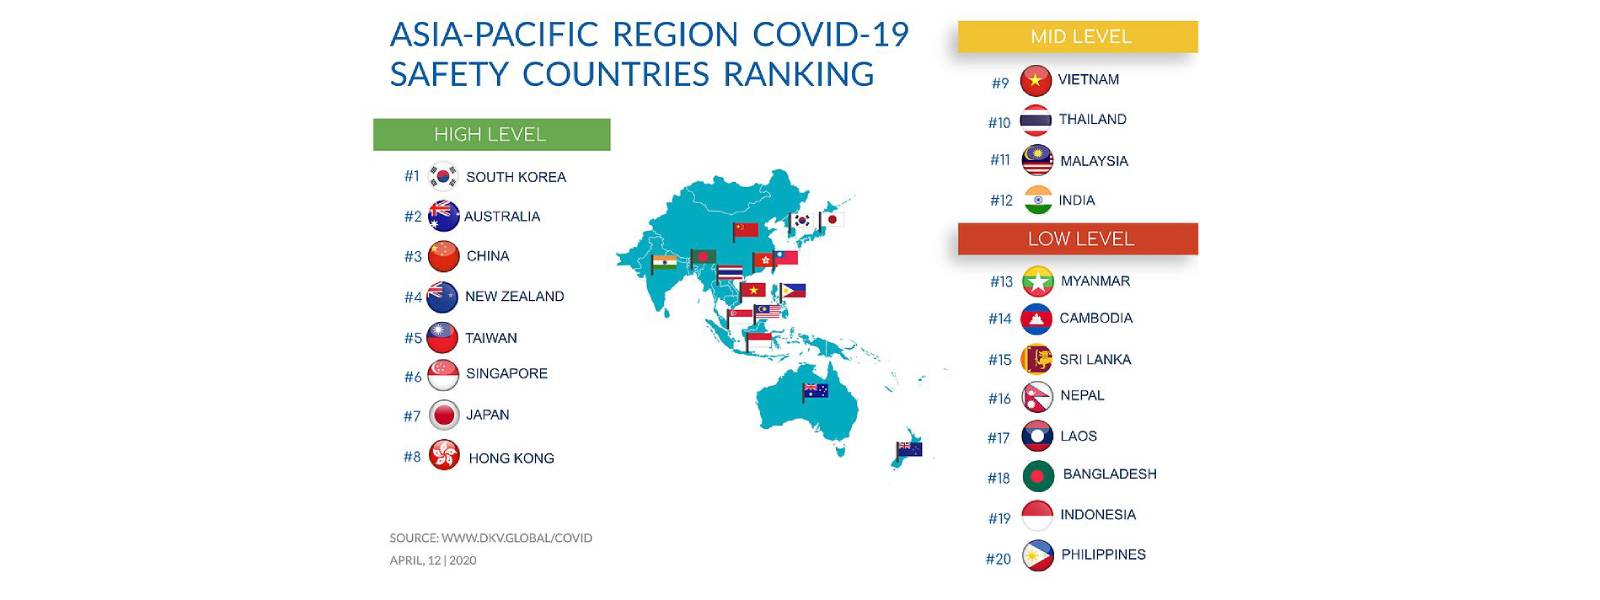 Sri Lanka ranked 16th among high risk countries for COVID – 19